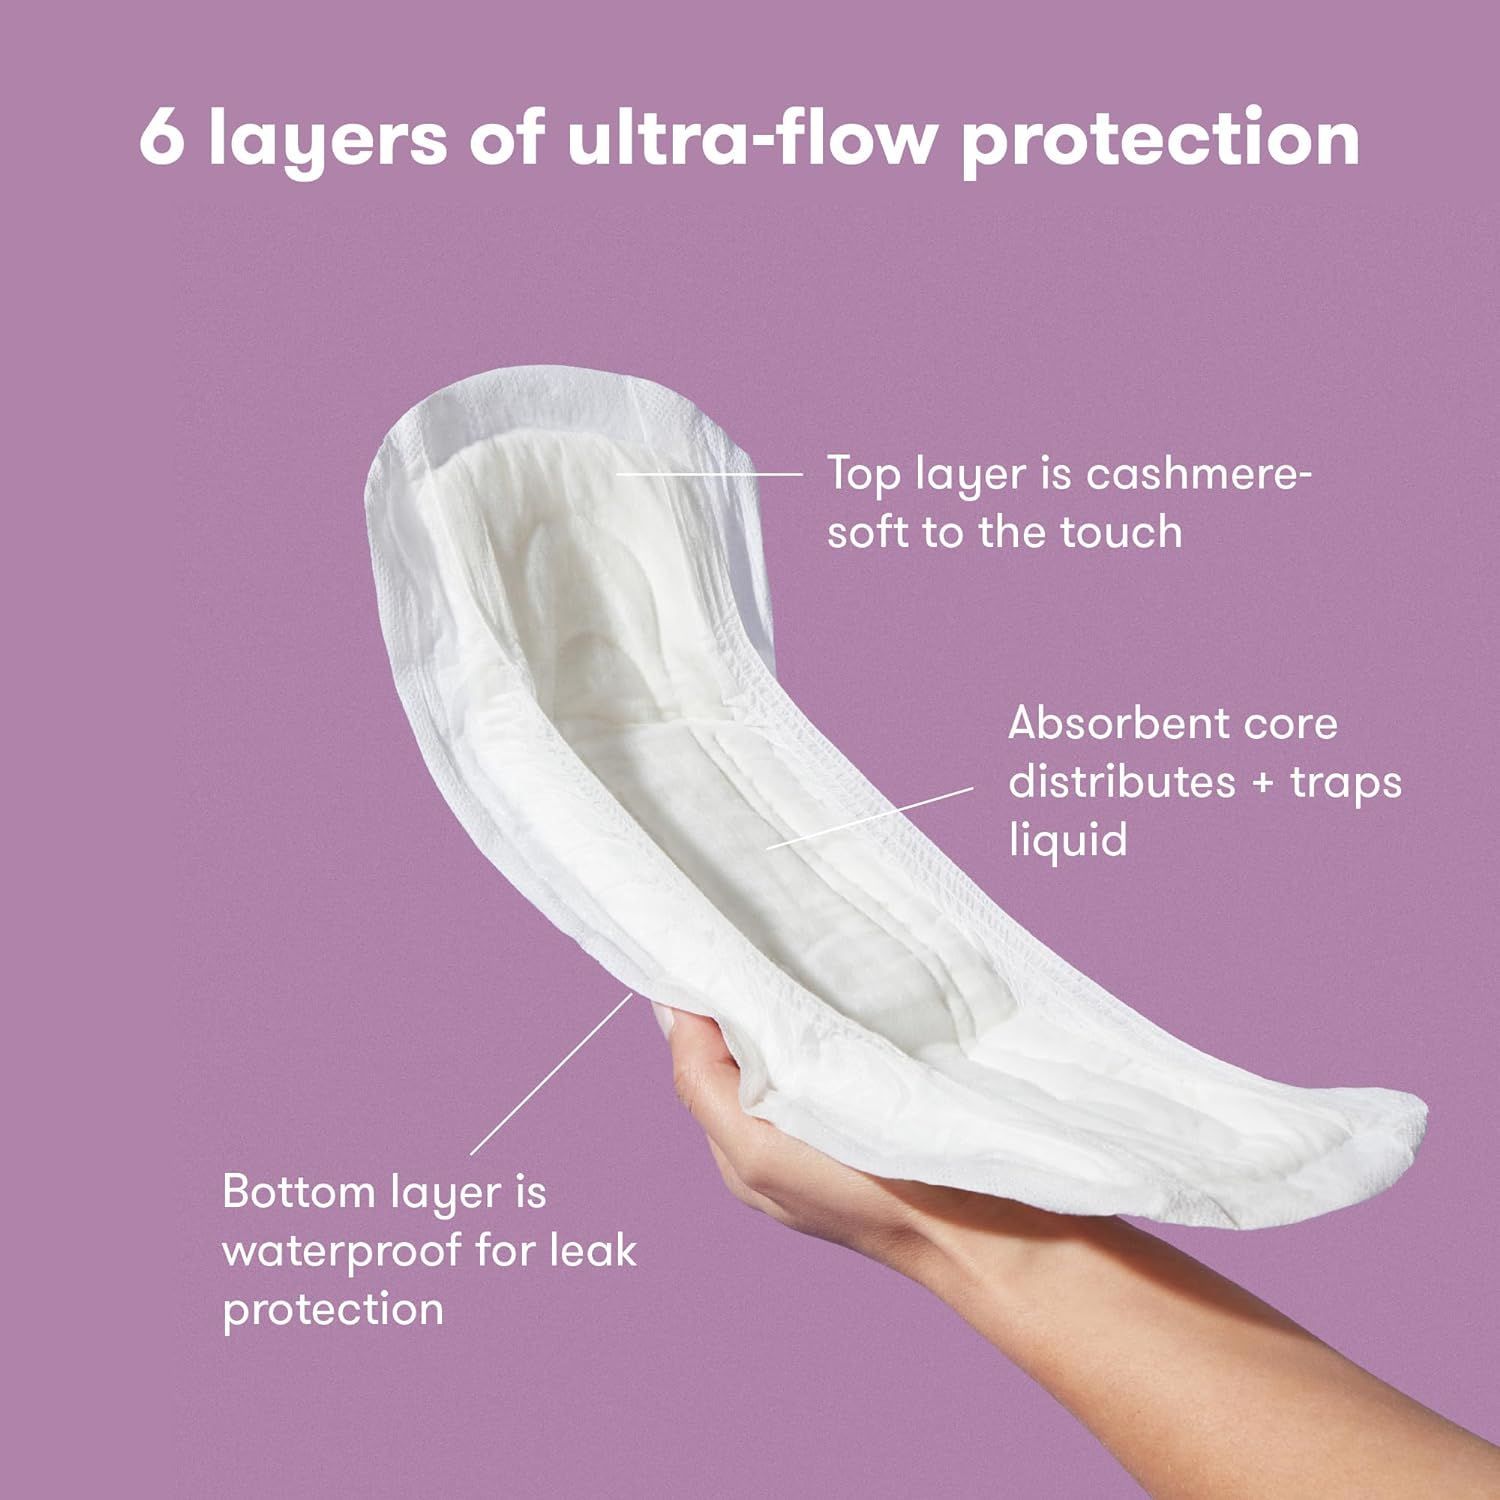 Mom Maternity Pads Super Absorbent Pads for Sanitary Postpartum